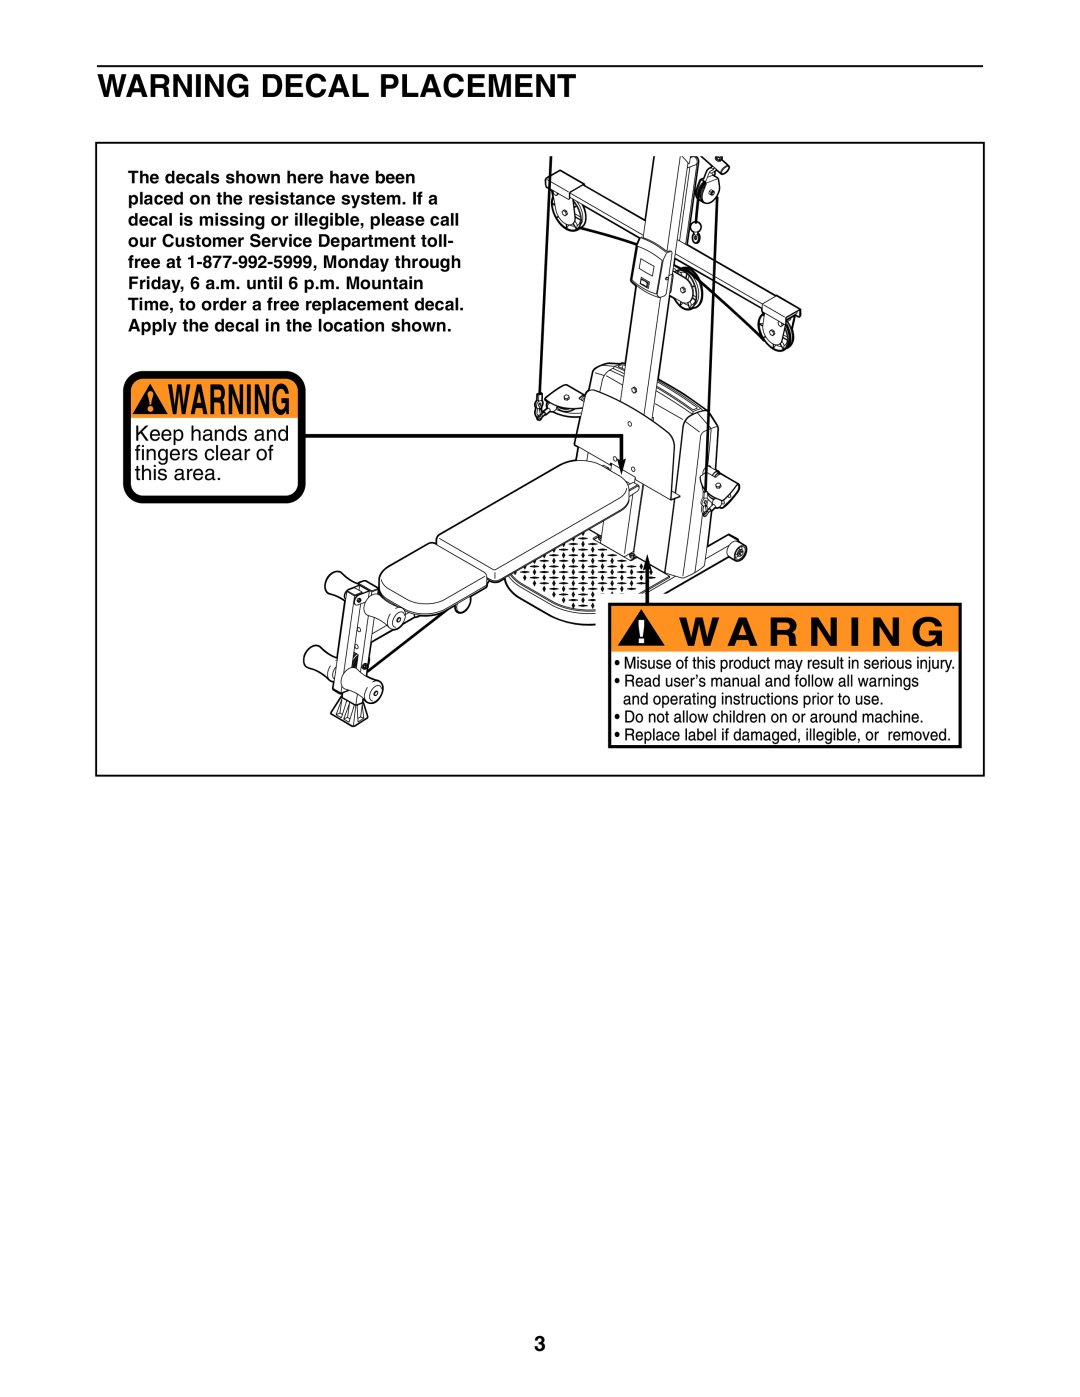 Weider WESY68632 user manual Warning Decal Placement, Keep hands and fingers clear of this area 